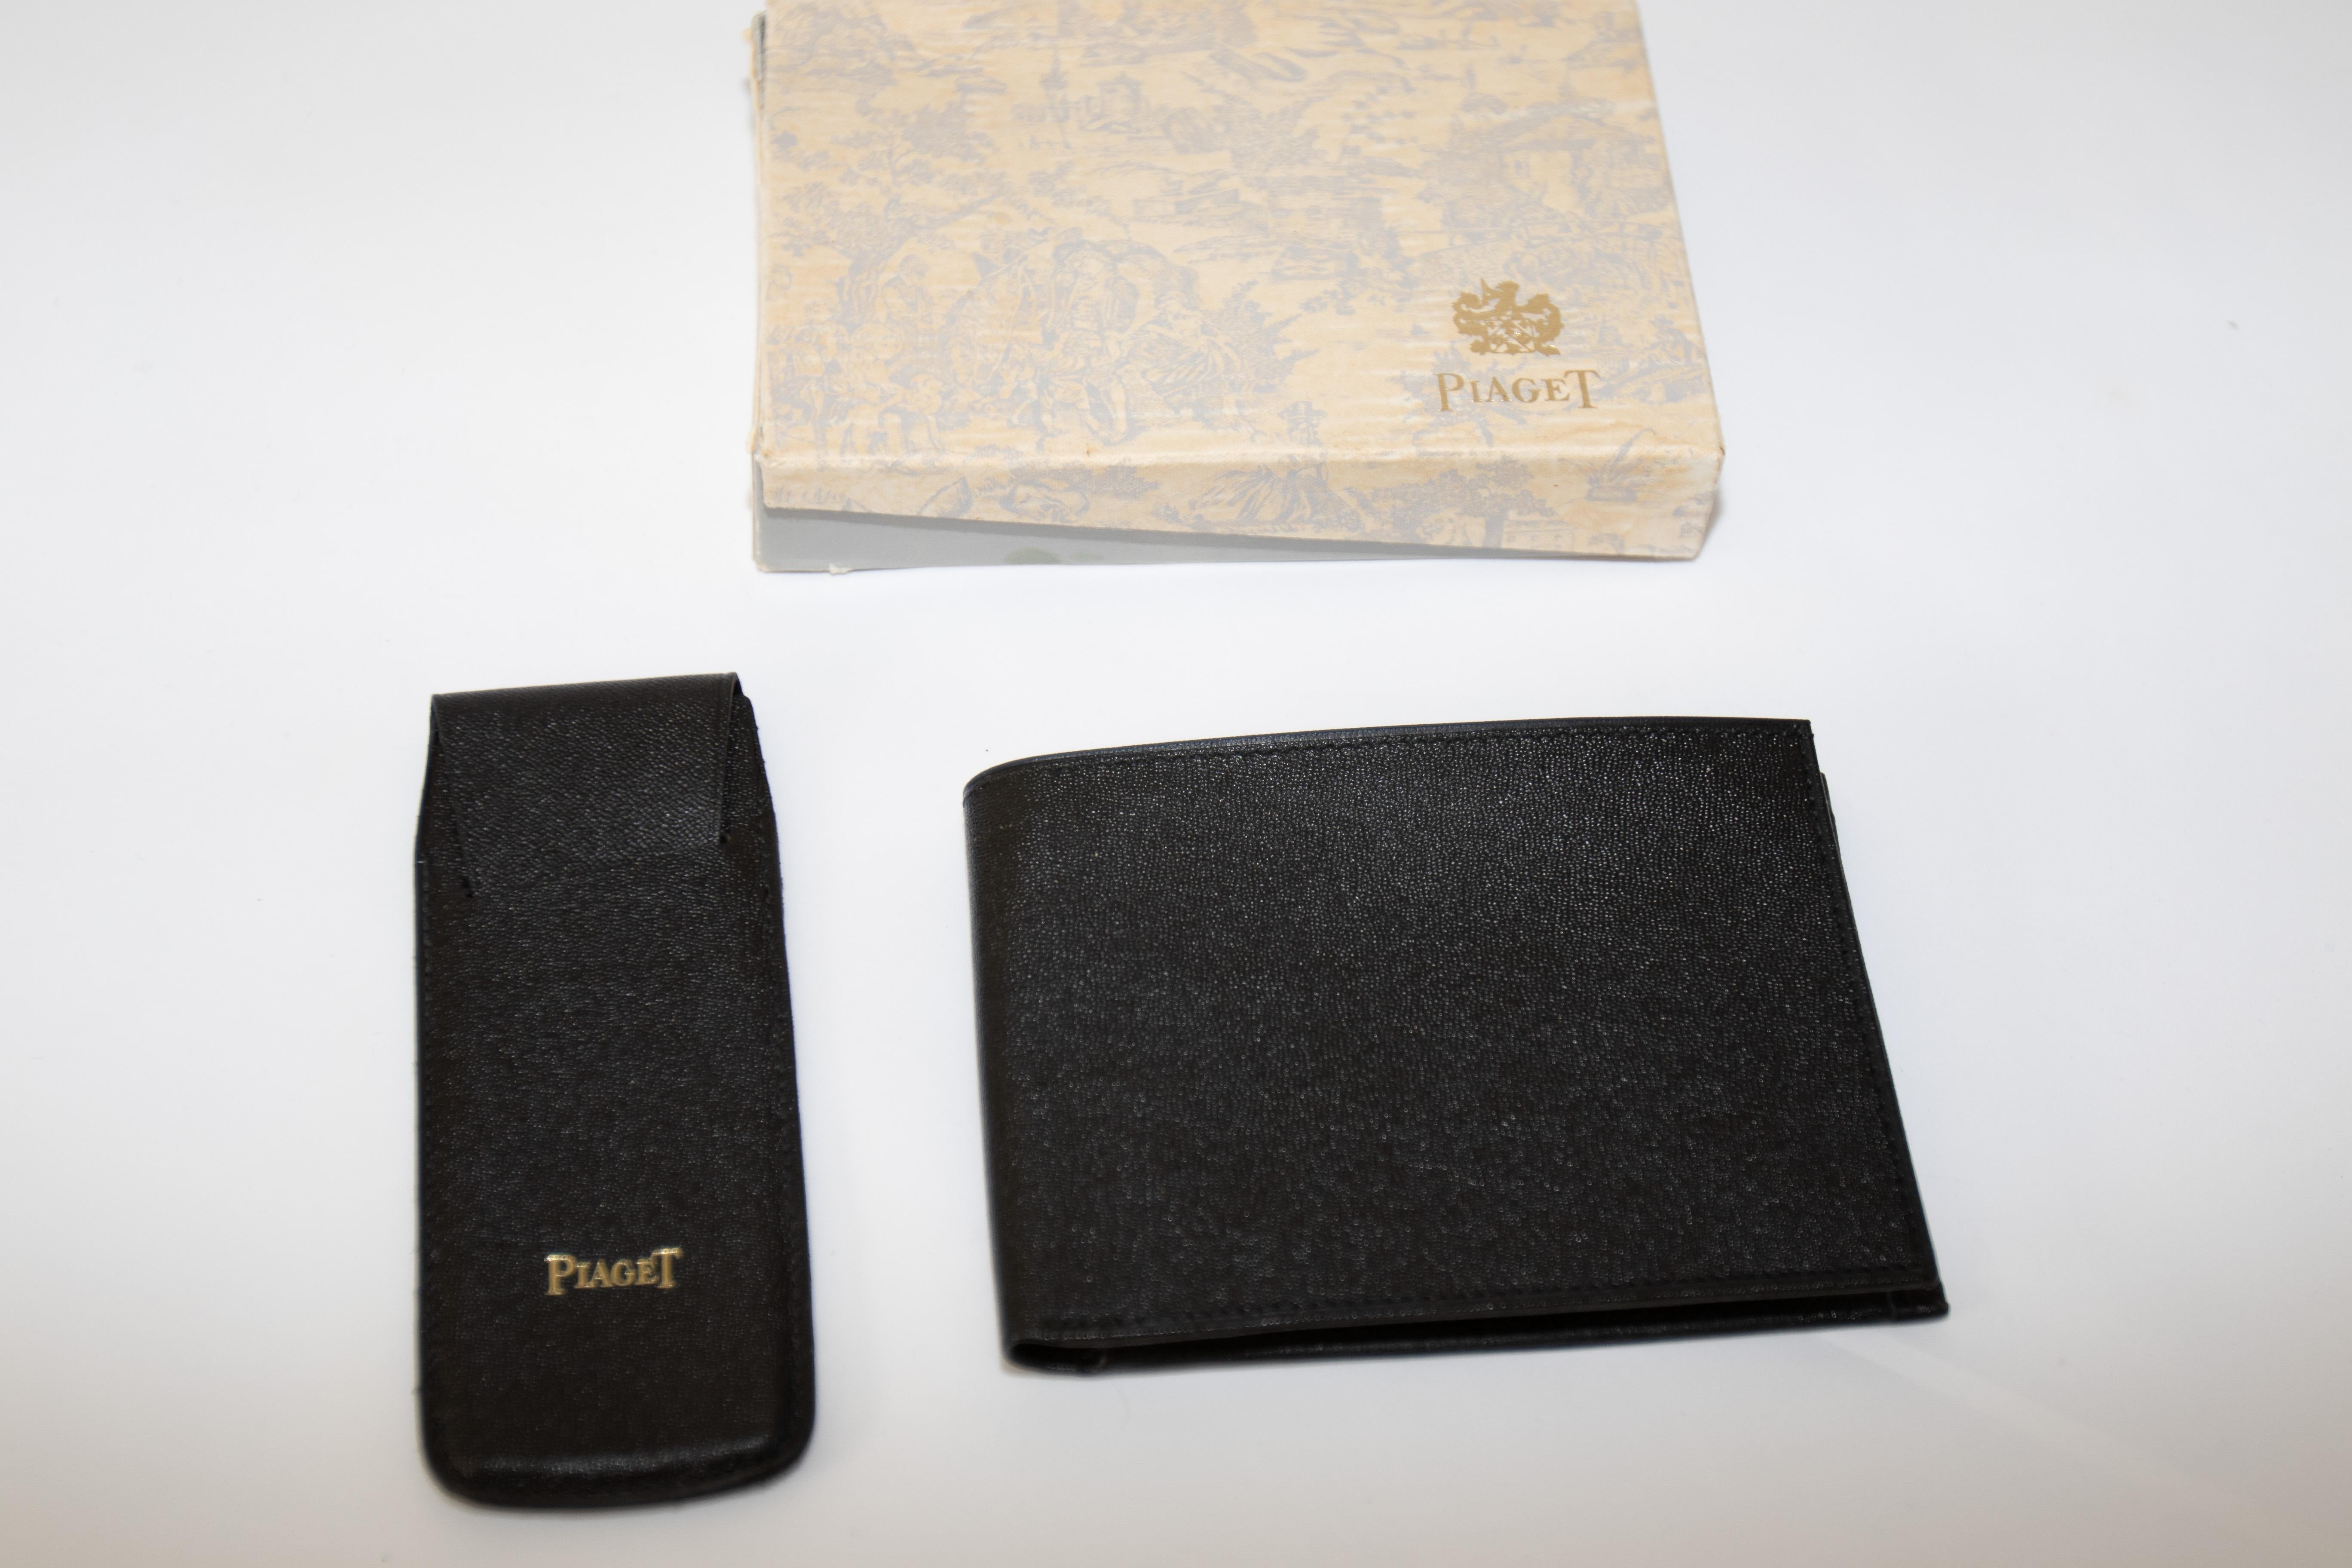 Vintage Piaget black leather wallet and small watch pouch in original vintage box.
Piaget Vintage leather wallet black leather complete outer box new old stock condition.
Wallet has a coin compartment with a snap. Wallet dimensions: 3.5